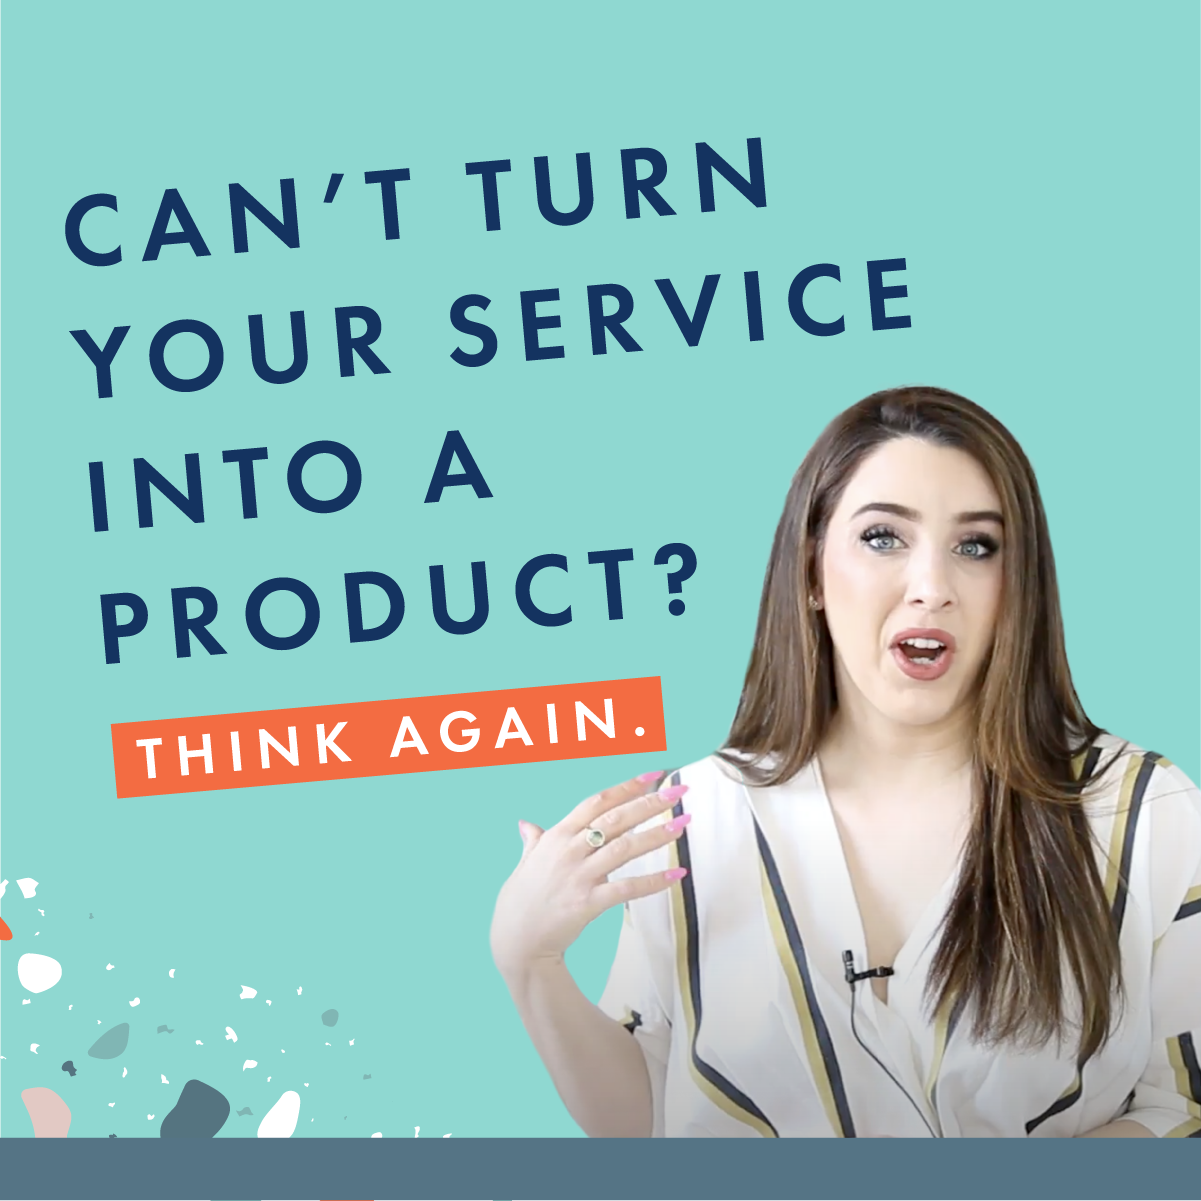 Yes, You CAN Turn Your Services Into Digital Products